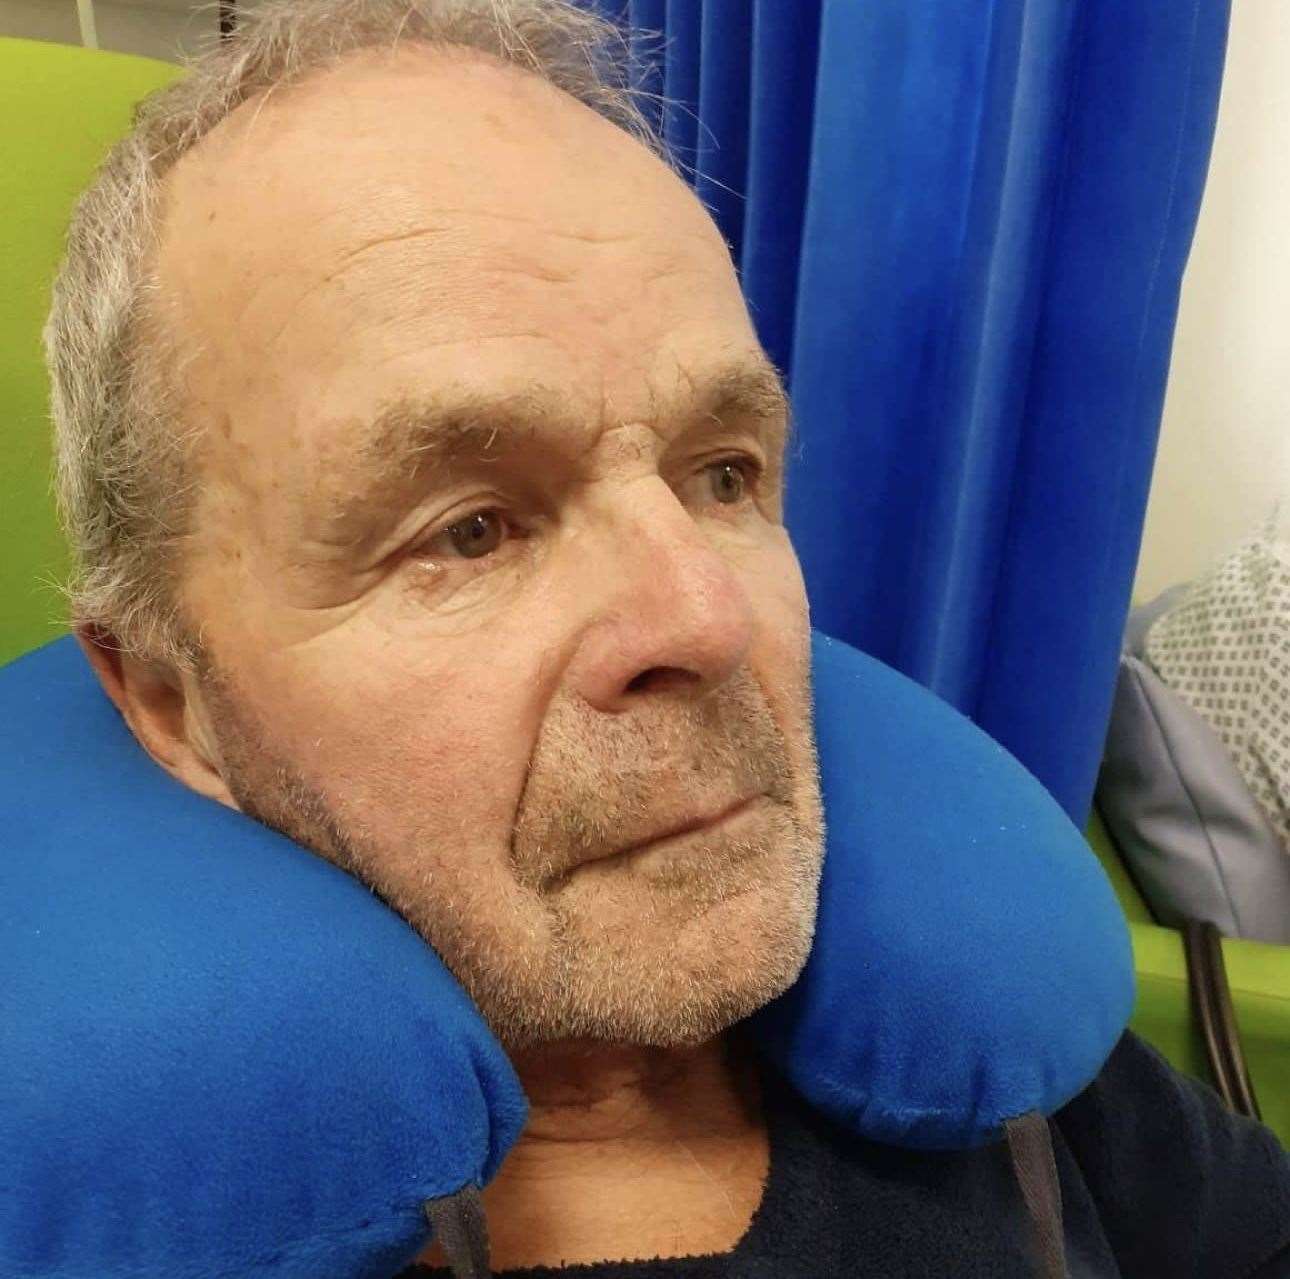 Geoffrey Knell, 79, was admitted with a chest infection and later diagnosed with pneumonia. Picture: Paul Knell